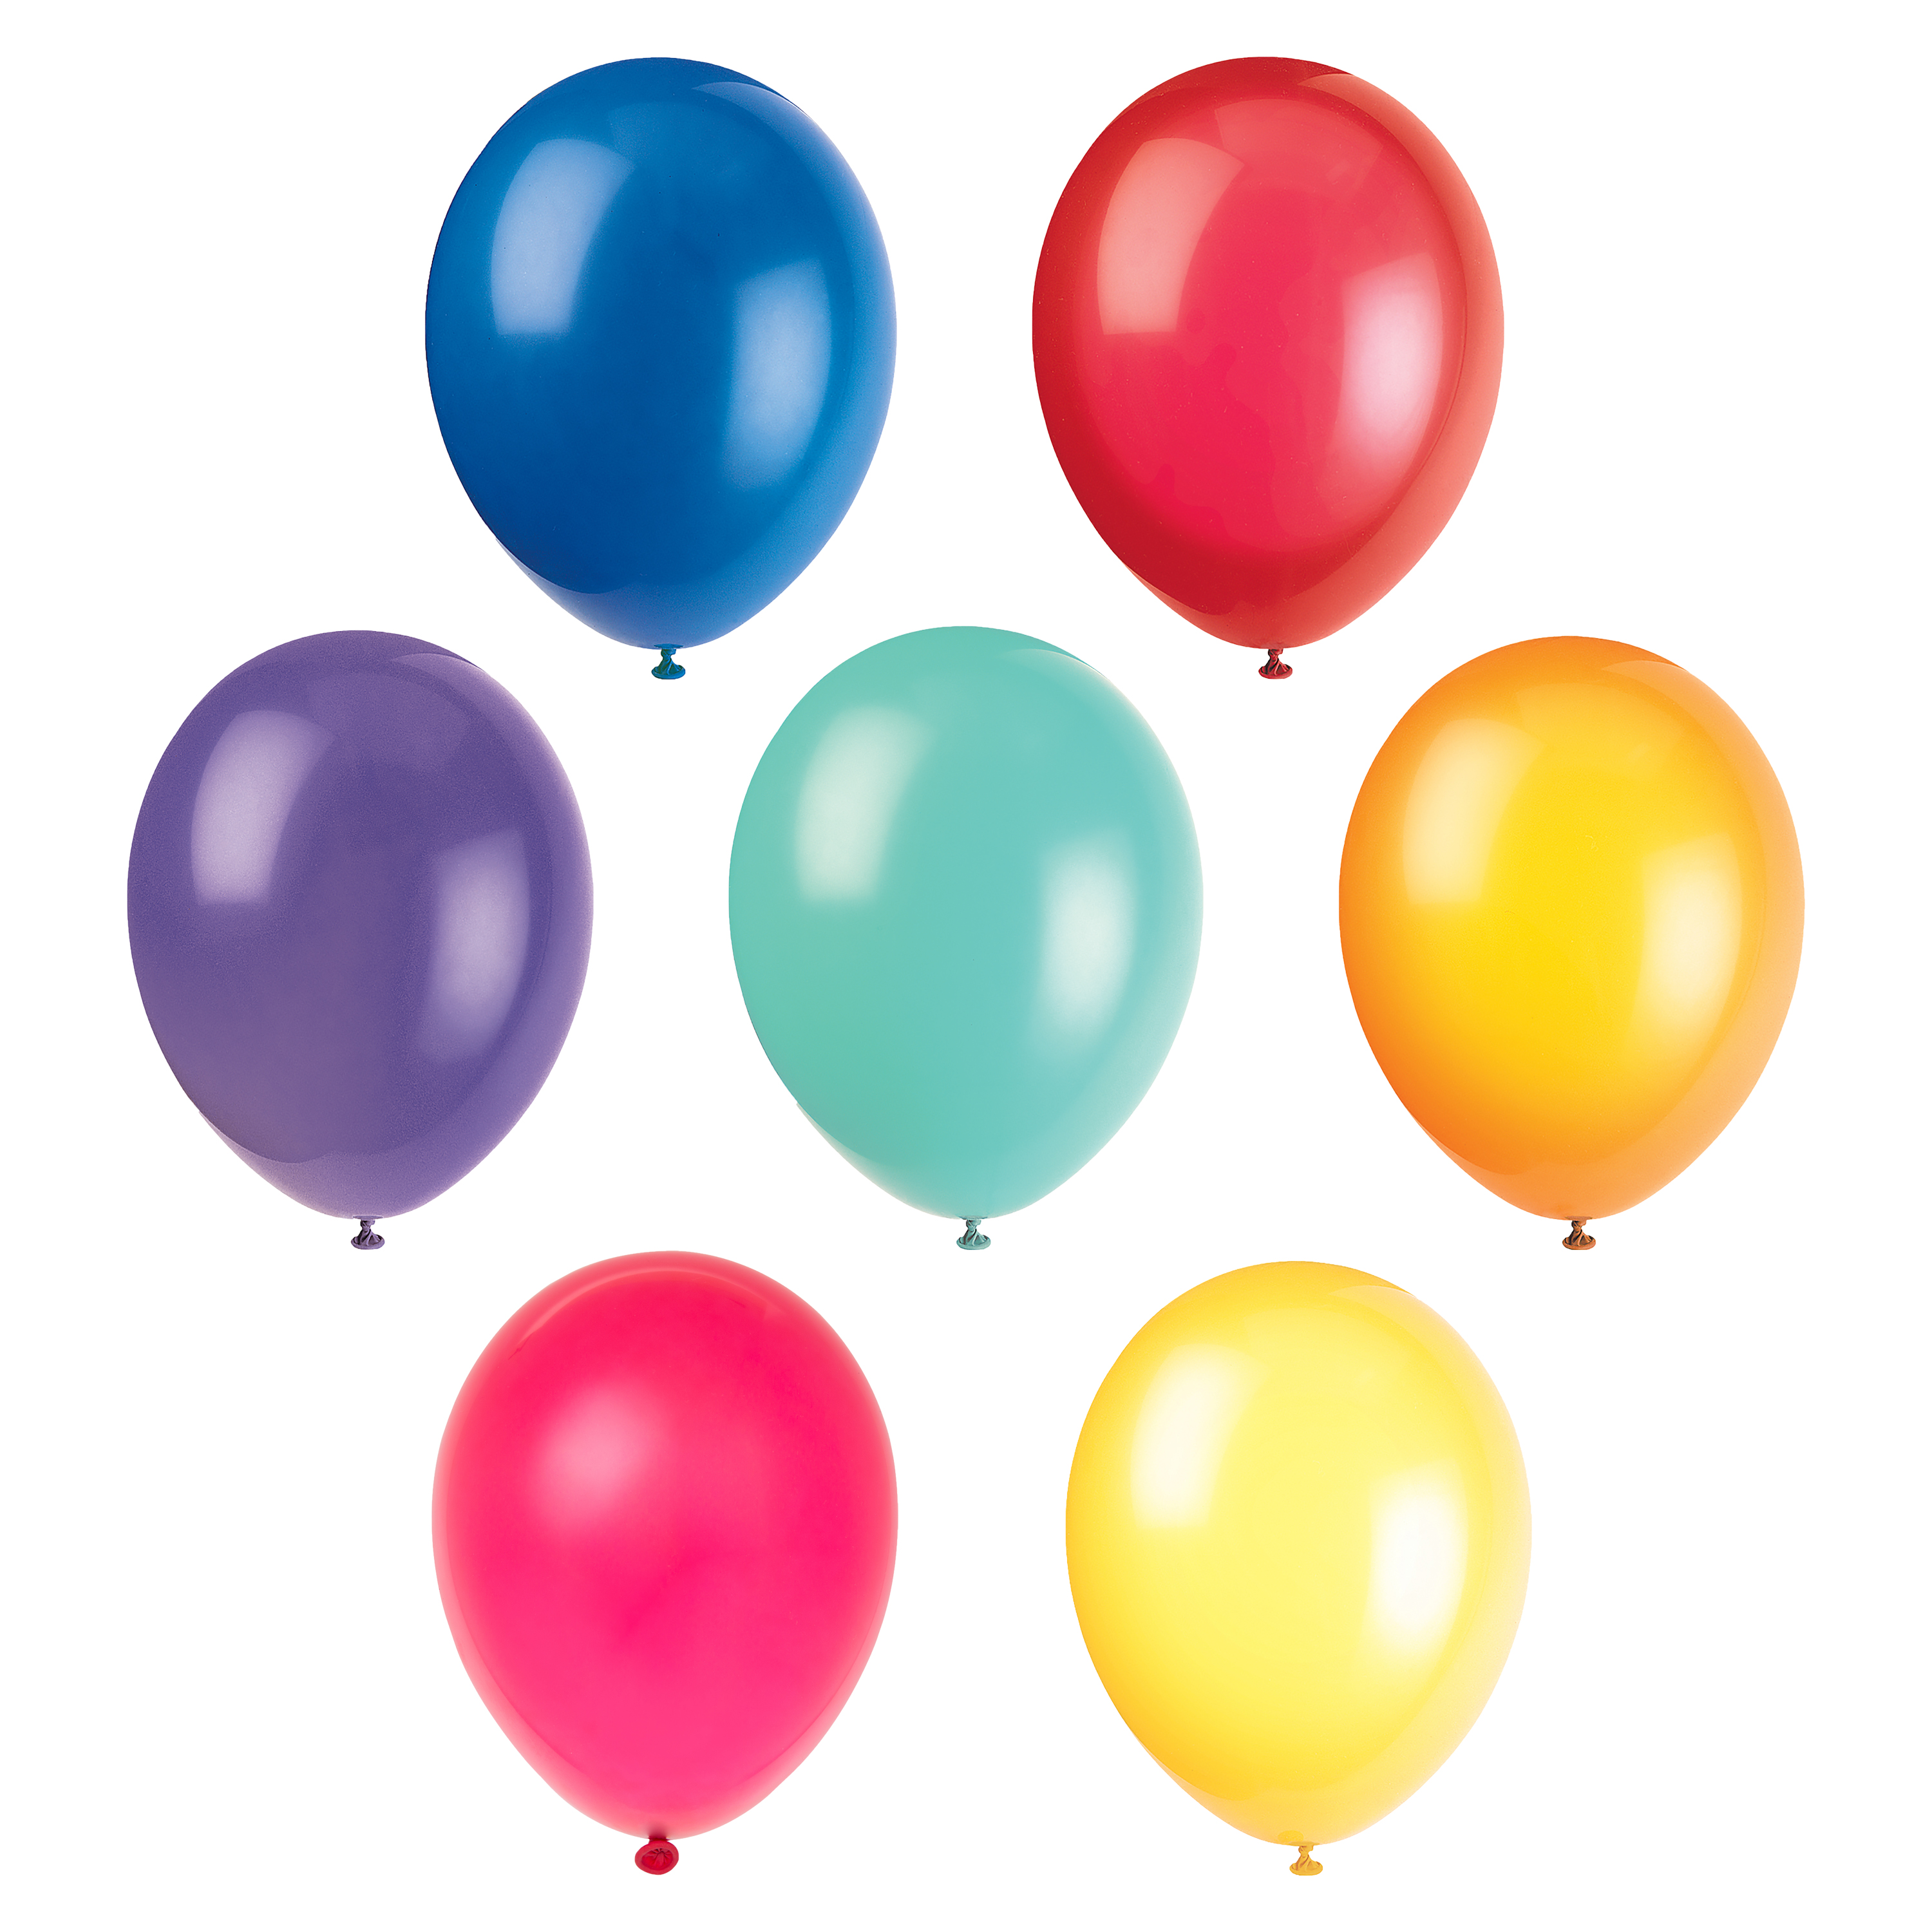 Unique Industries Latex 12" Multi-color Solid Print Birthday Balloons, 10 Count - image 1 of 10